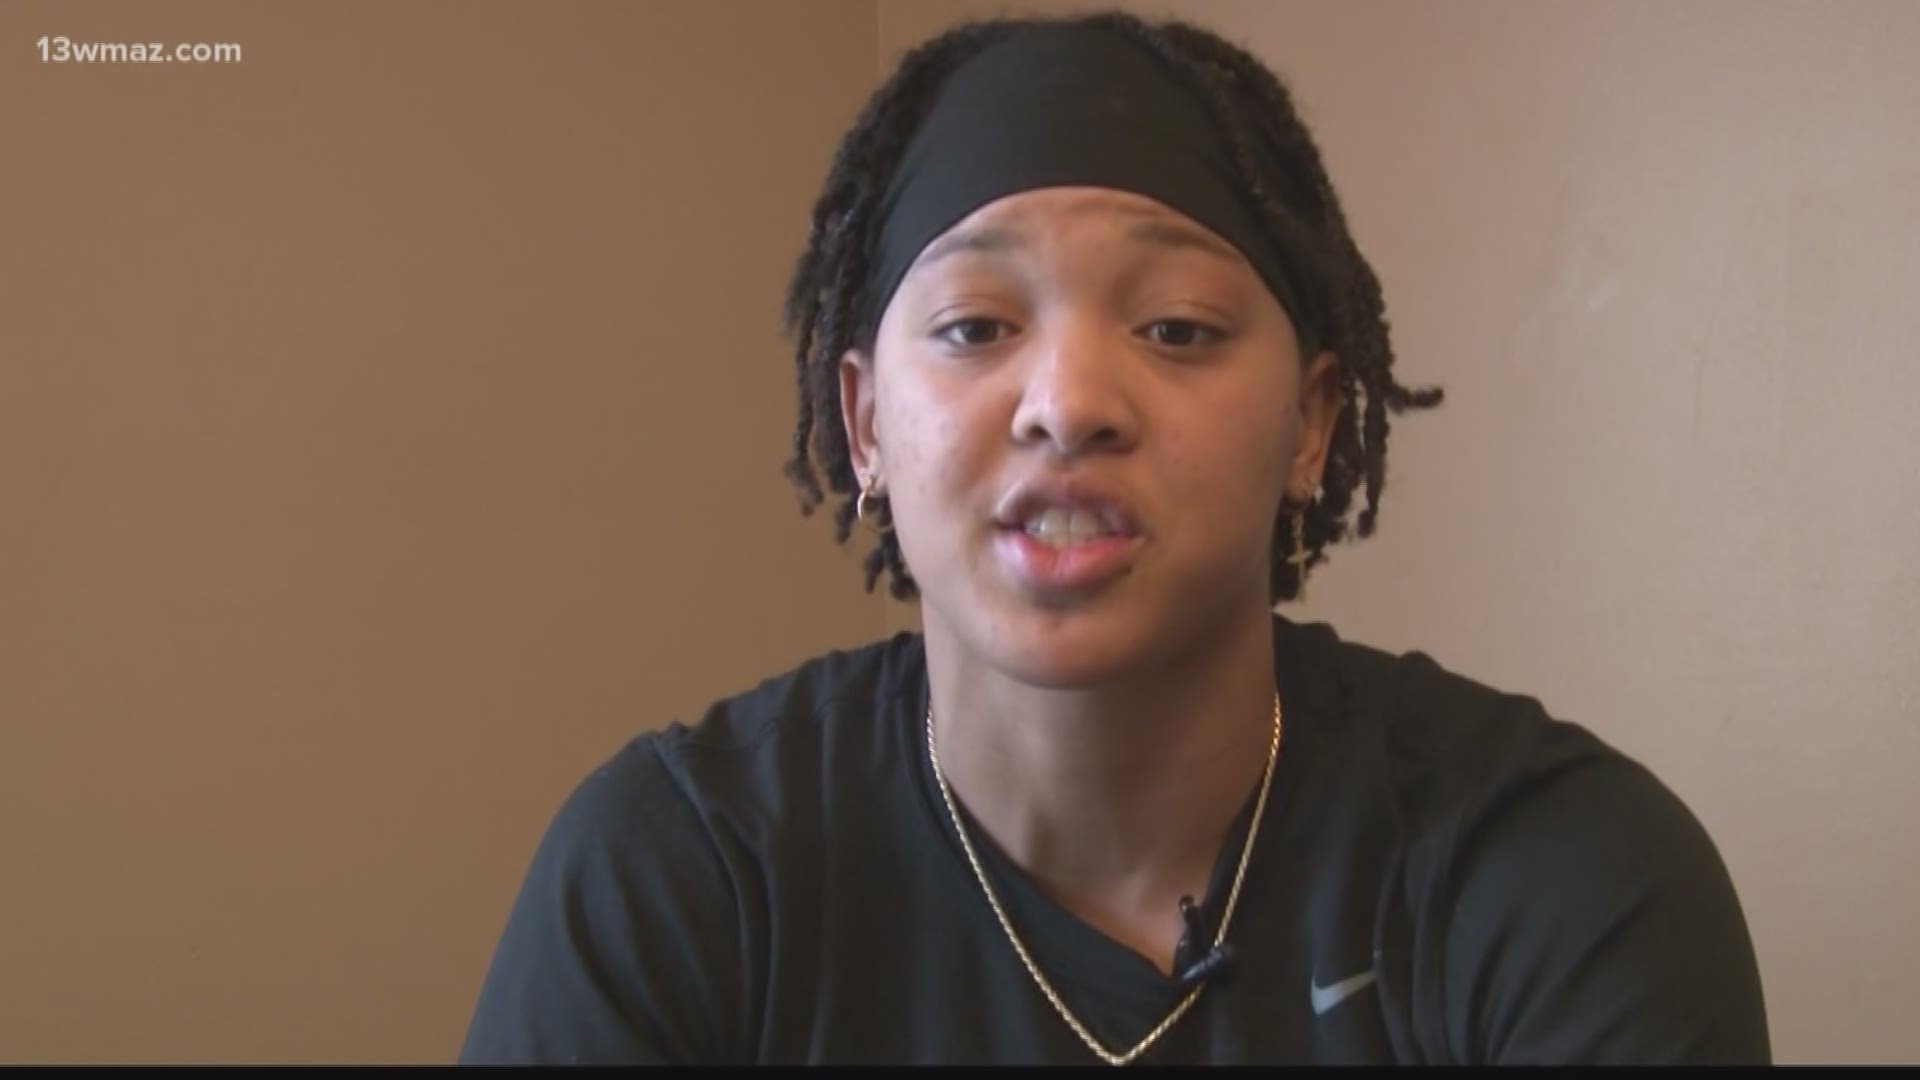 Nausia Woolfolk talks about moving on after the cancellation of the NCAA tournament due to the coronavirus.